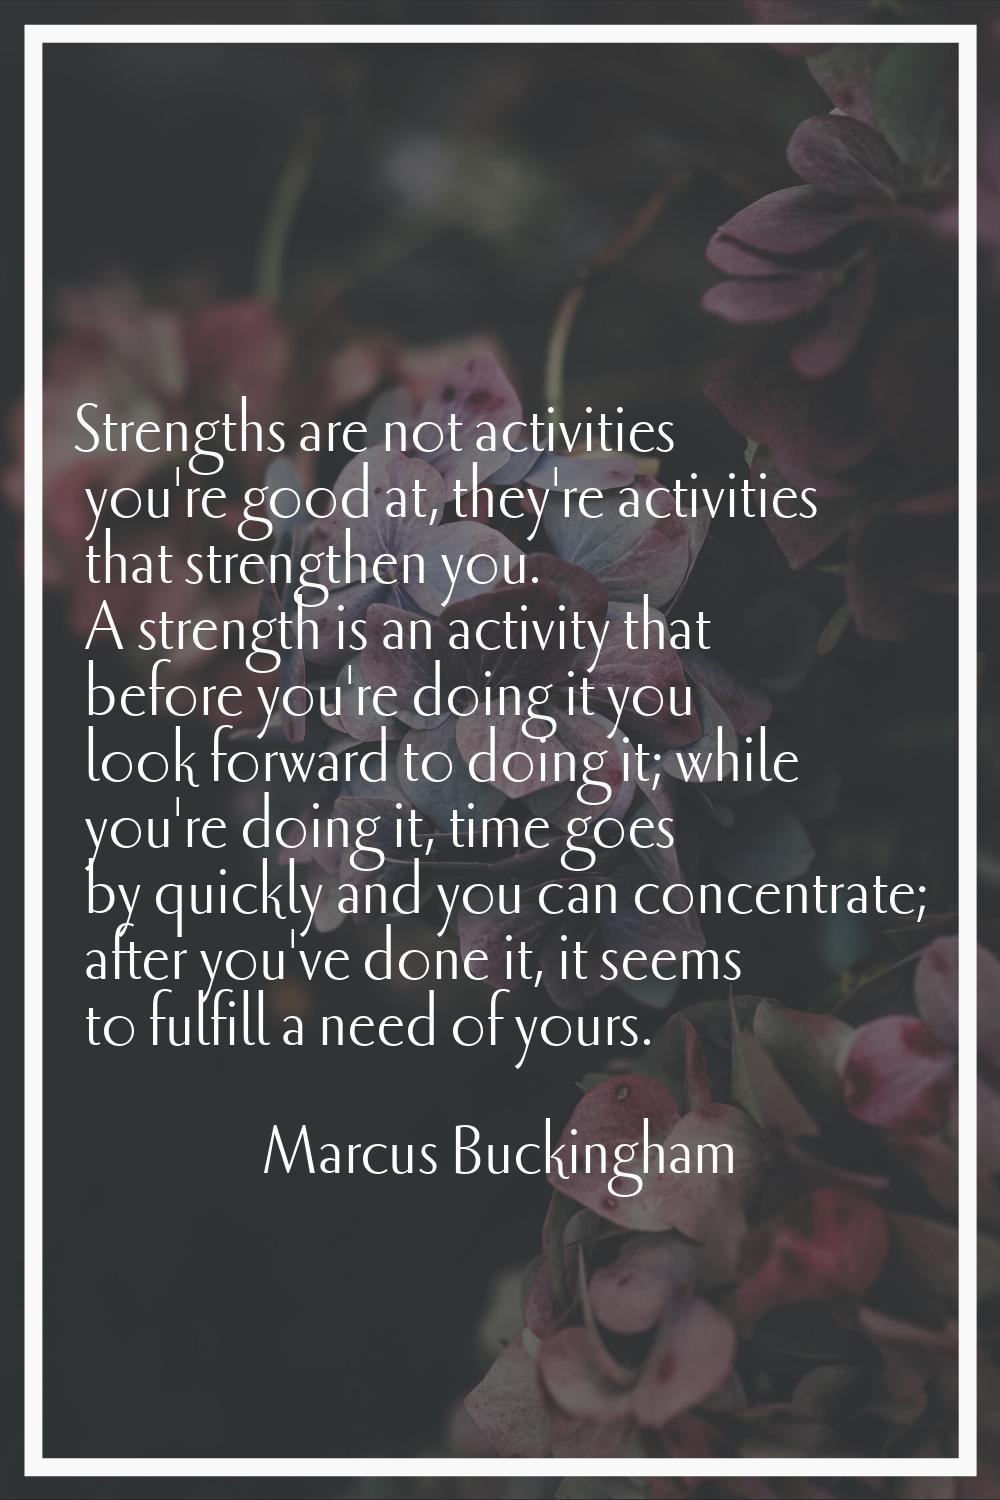 Strengths are not activities you're good at, they're activities that strengthen you. A strength is 